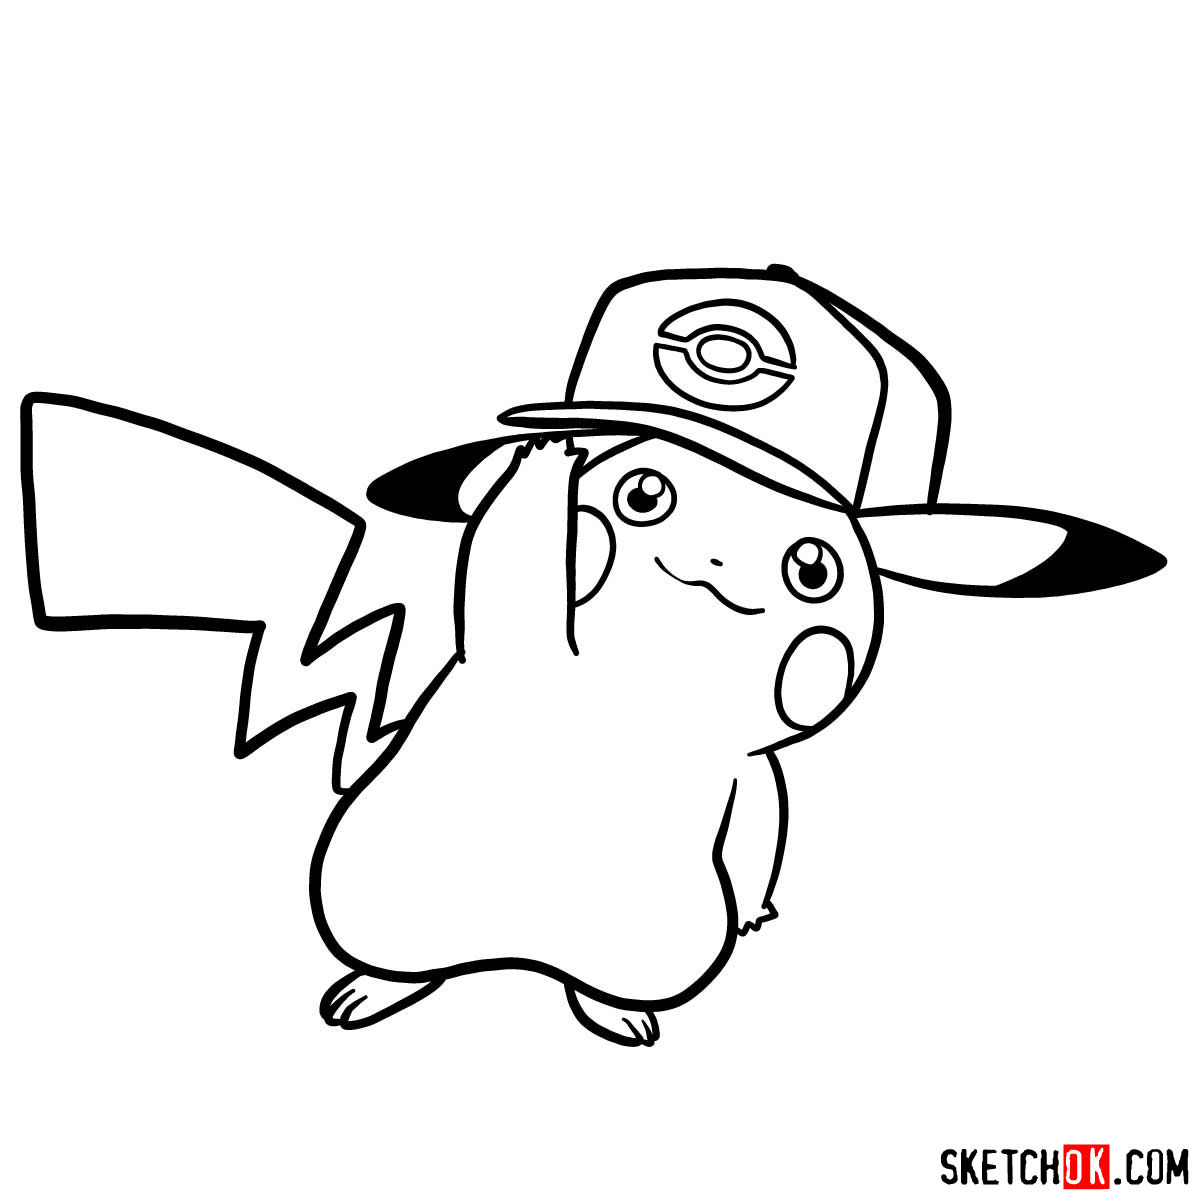 How to draw Pikachu in a cap with pokeball logo - step 09